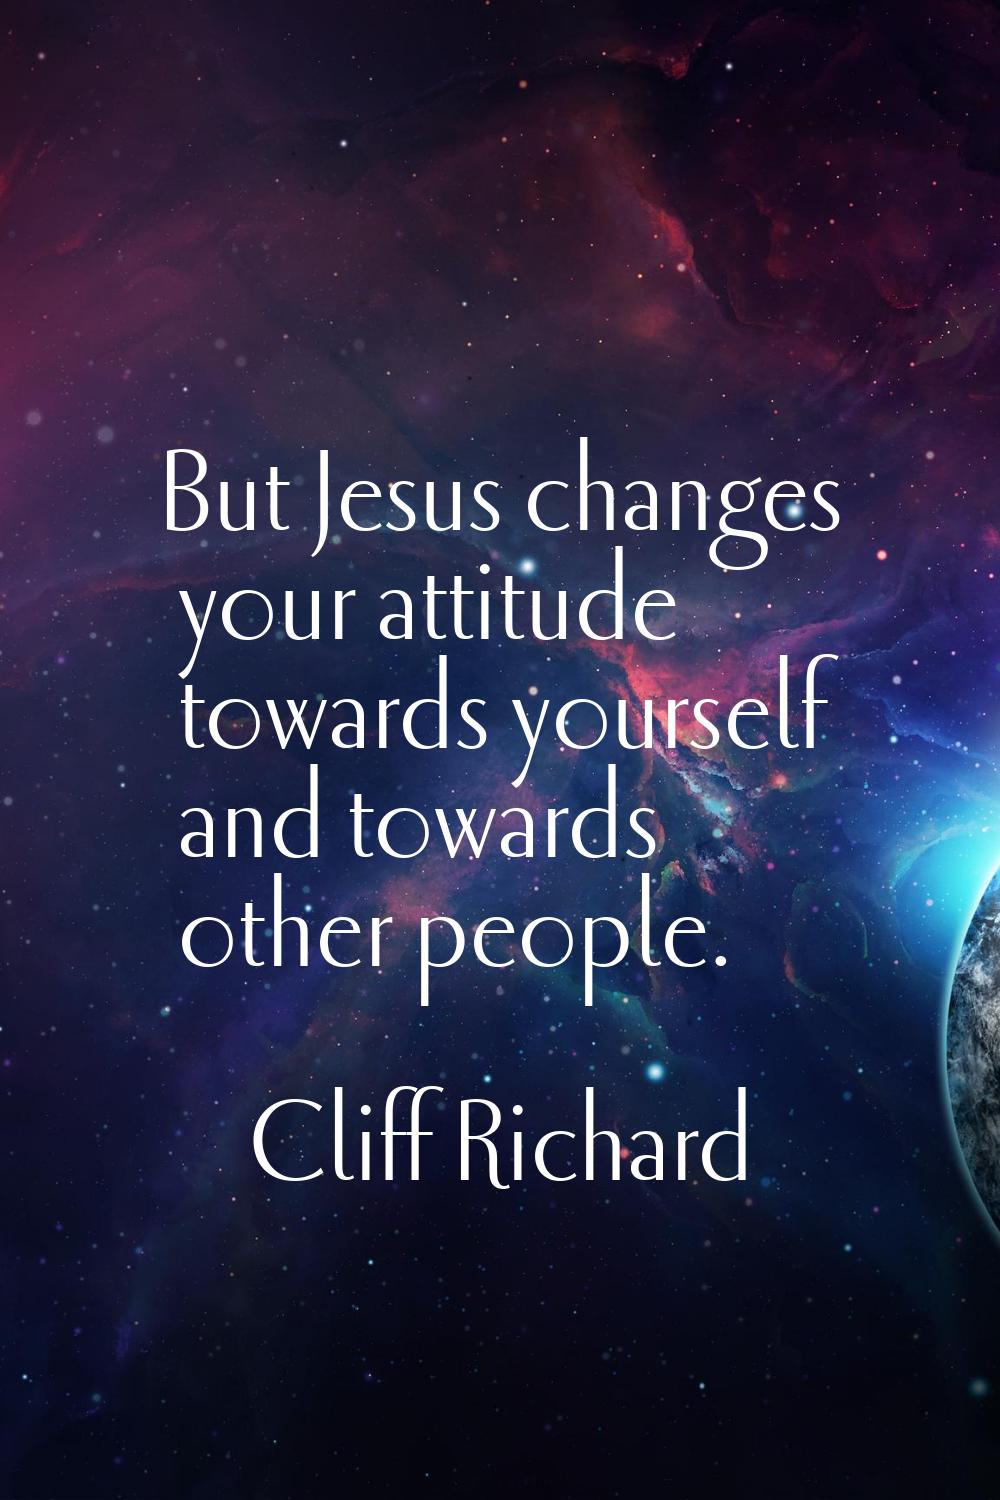 But Jesus changes your attitude towards yourself and towards other people.